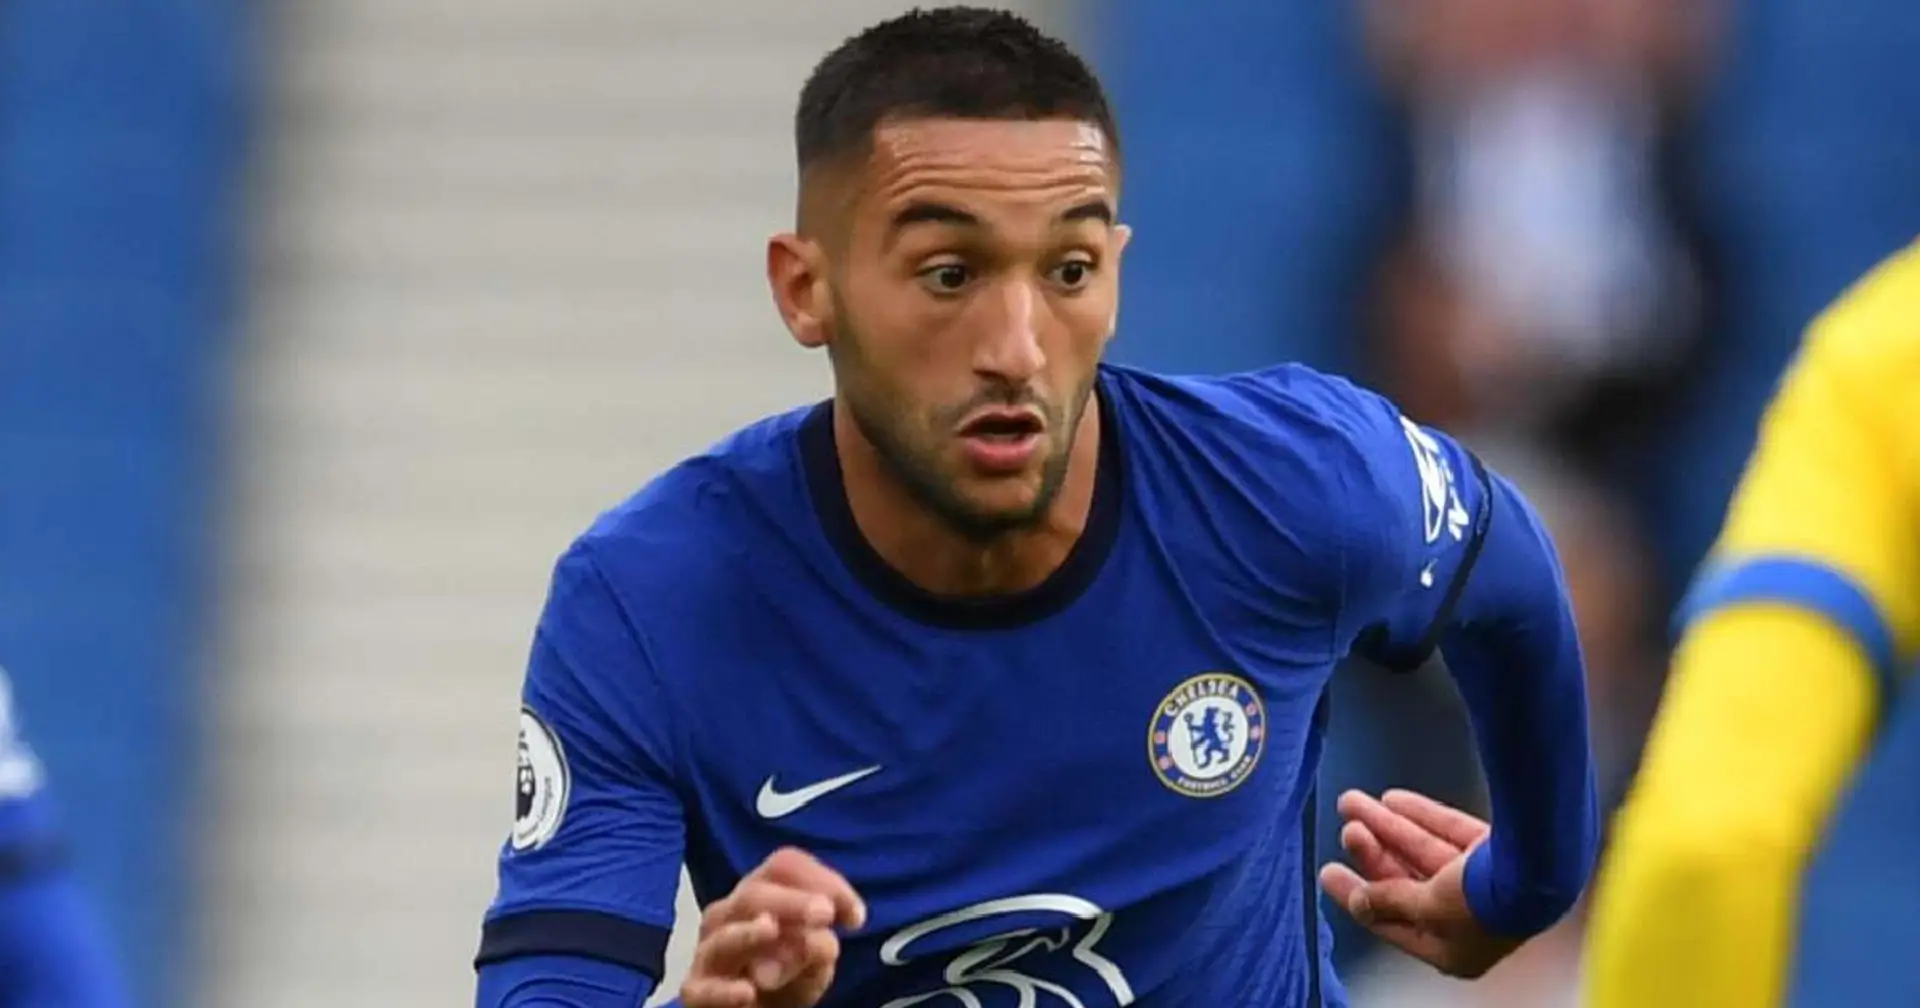  'It won’t be his last performance like that': Ex-Spurs player Garth Crooks explains why Ziyech will keep shining